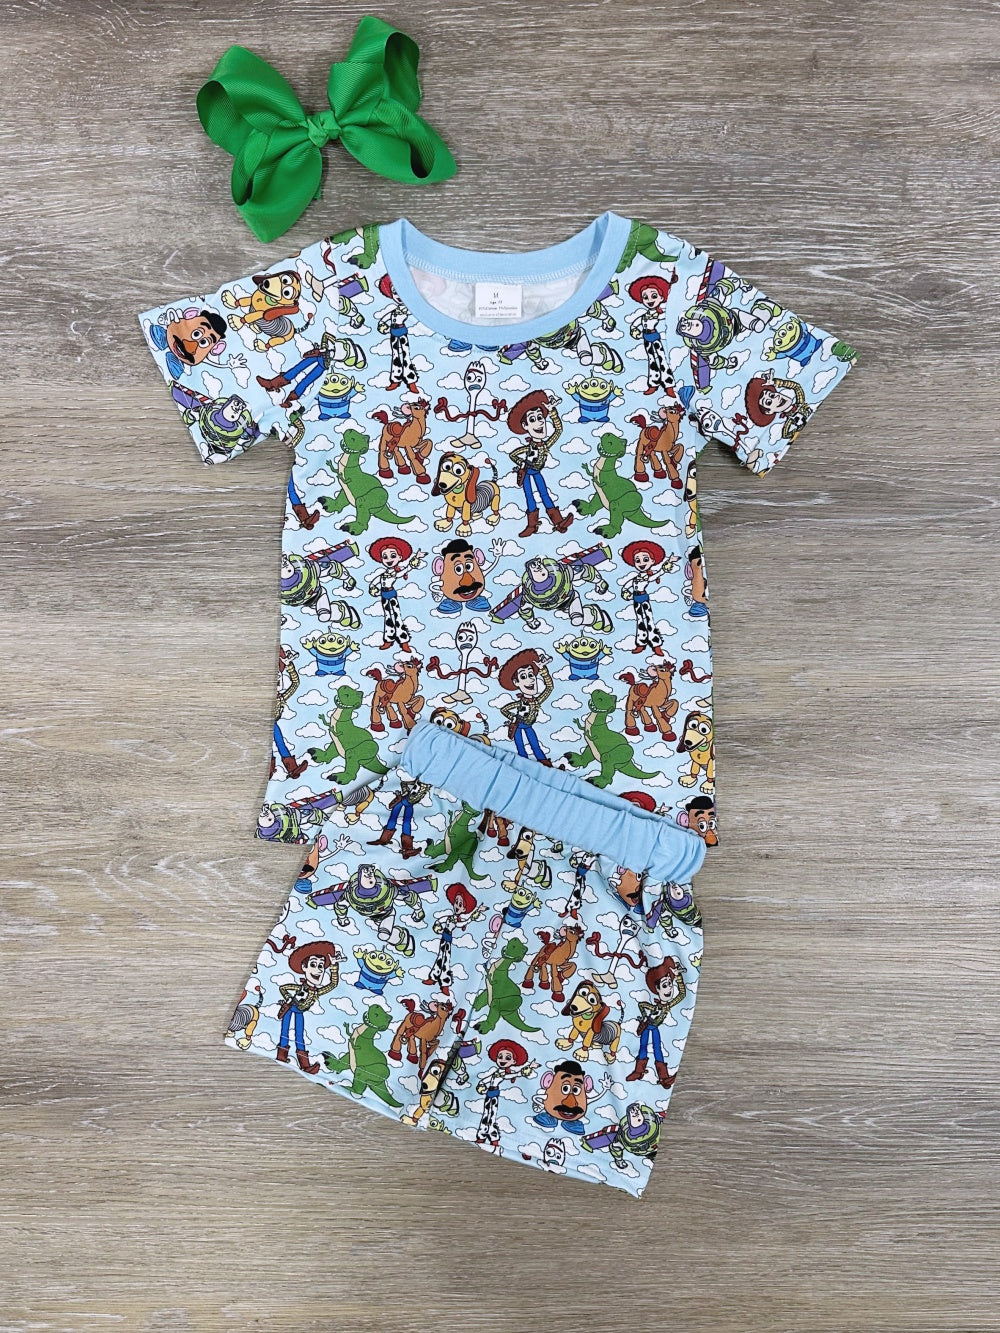 You Got a Friend in Me Short Sleeve Boys or Girls Pajama Set